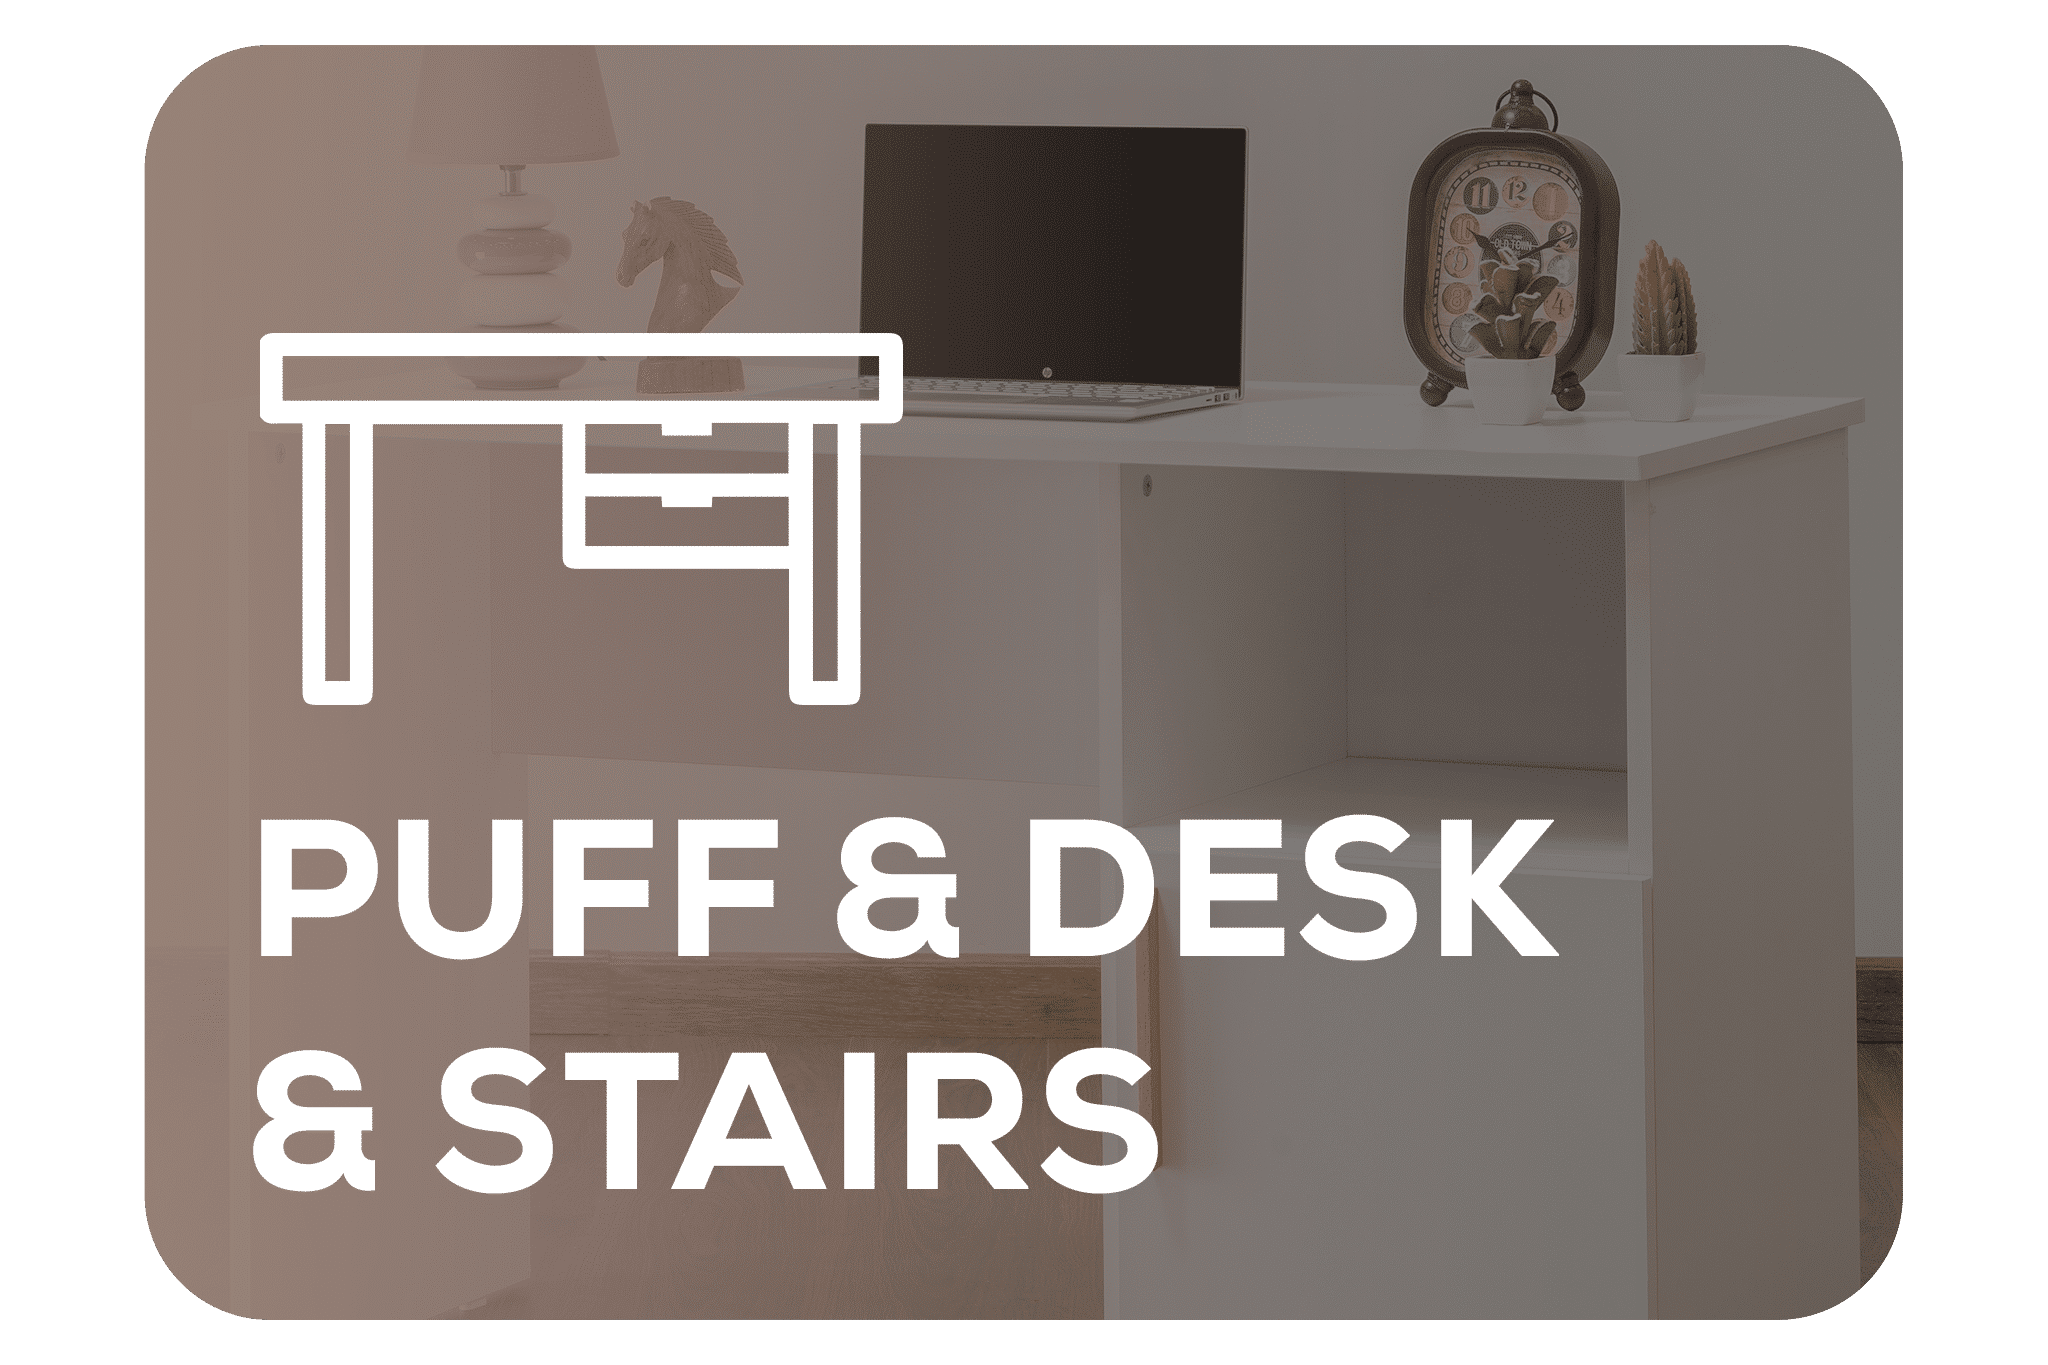 Puff-&-Desk-&-Stairs---ENGLISH